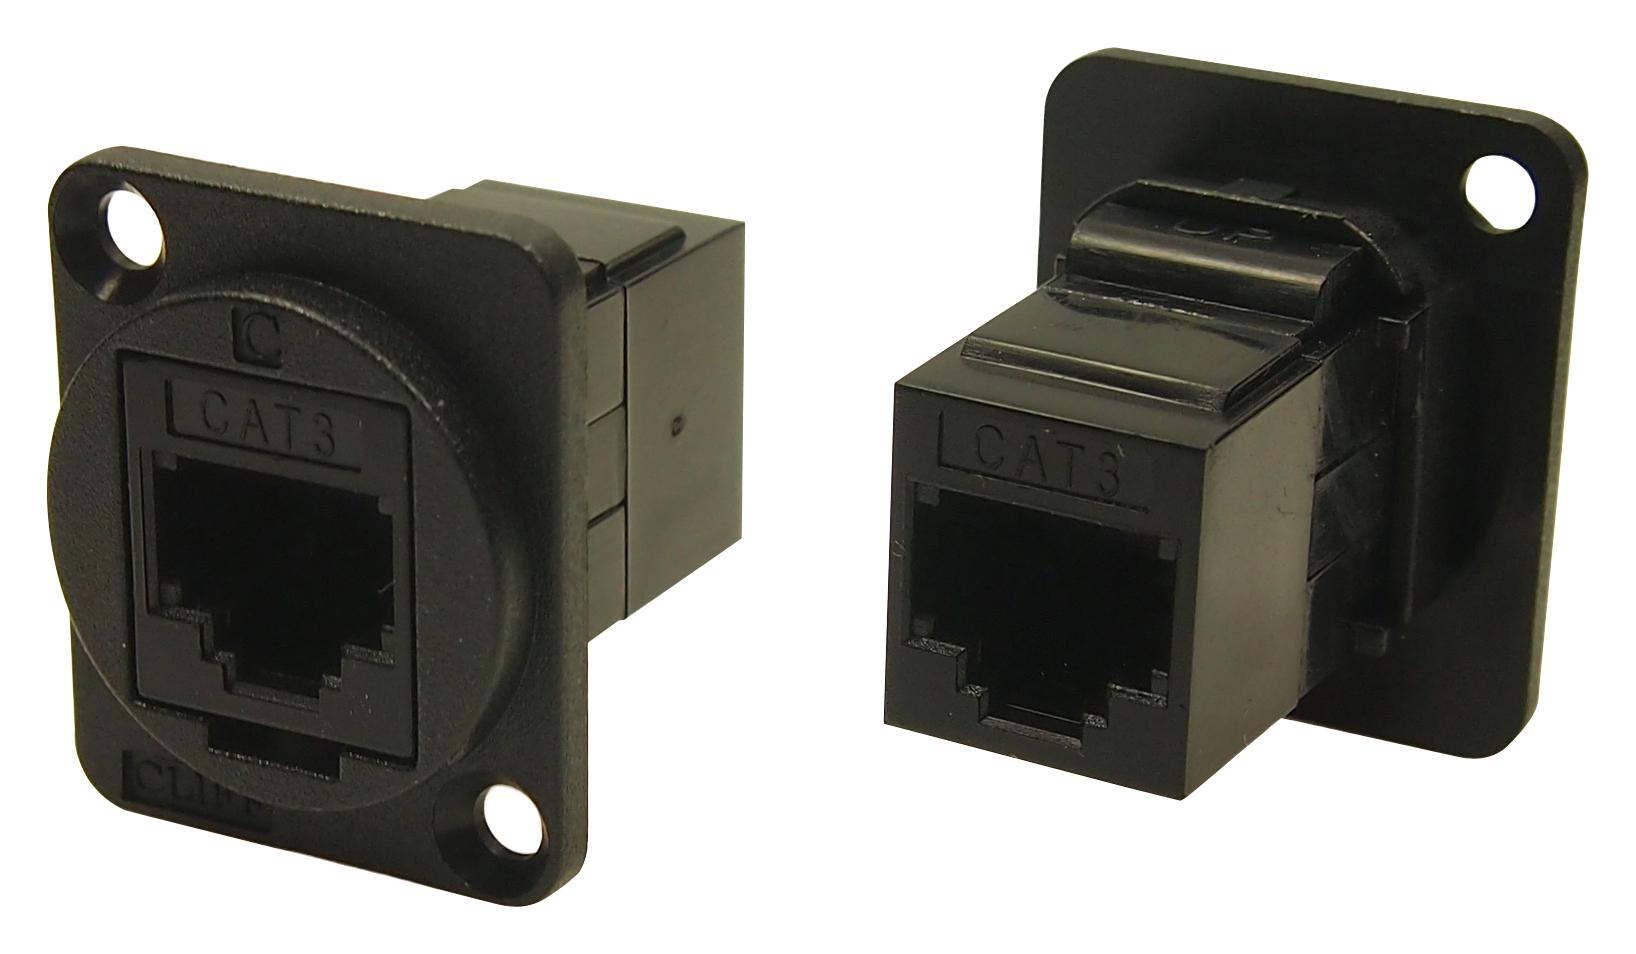 CP30224 ADAPTOR, RJ12 6P JACK-JACK, CAT3 CLIFF ELECTRONIC COMPONENTS